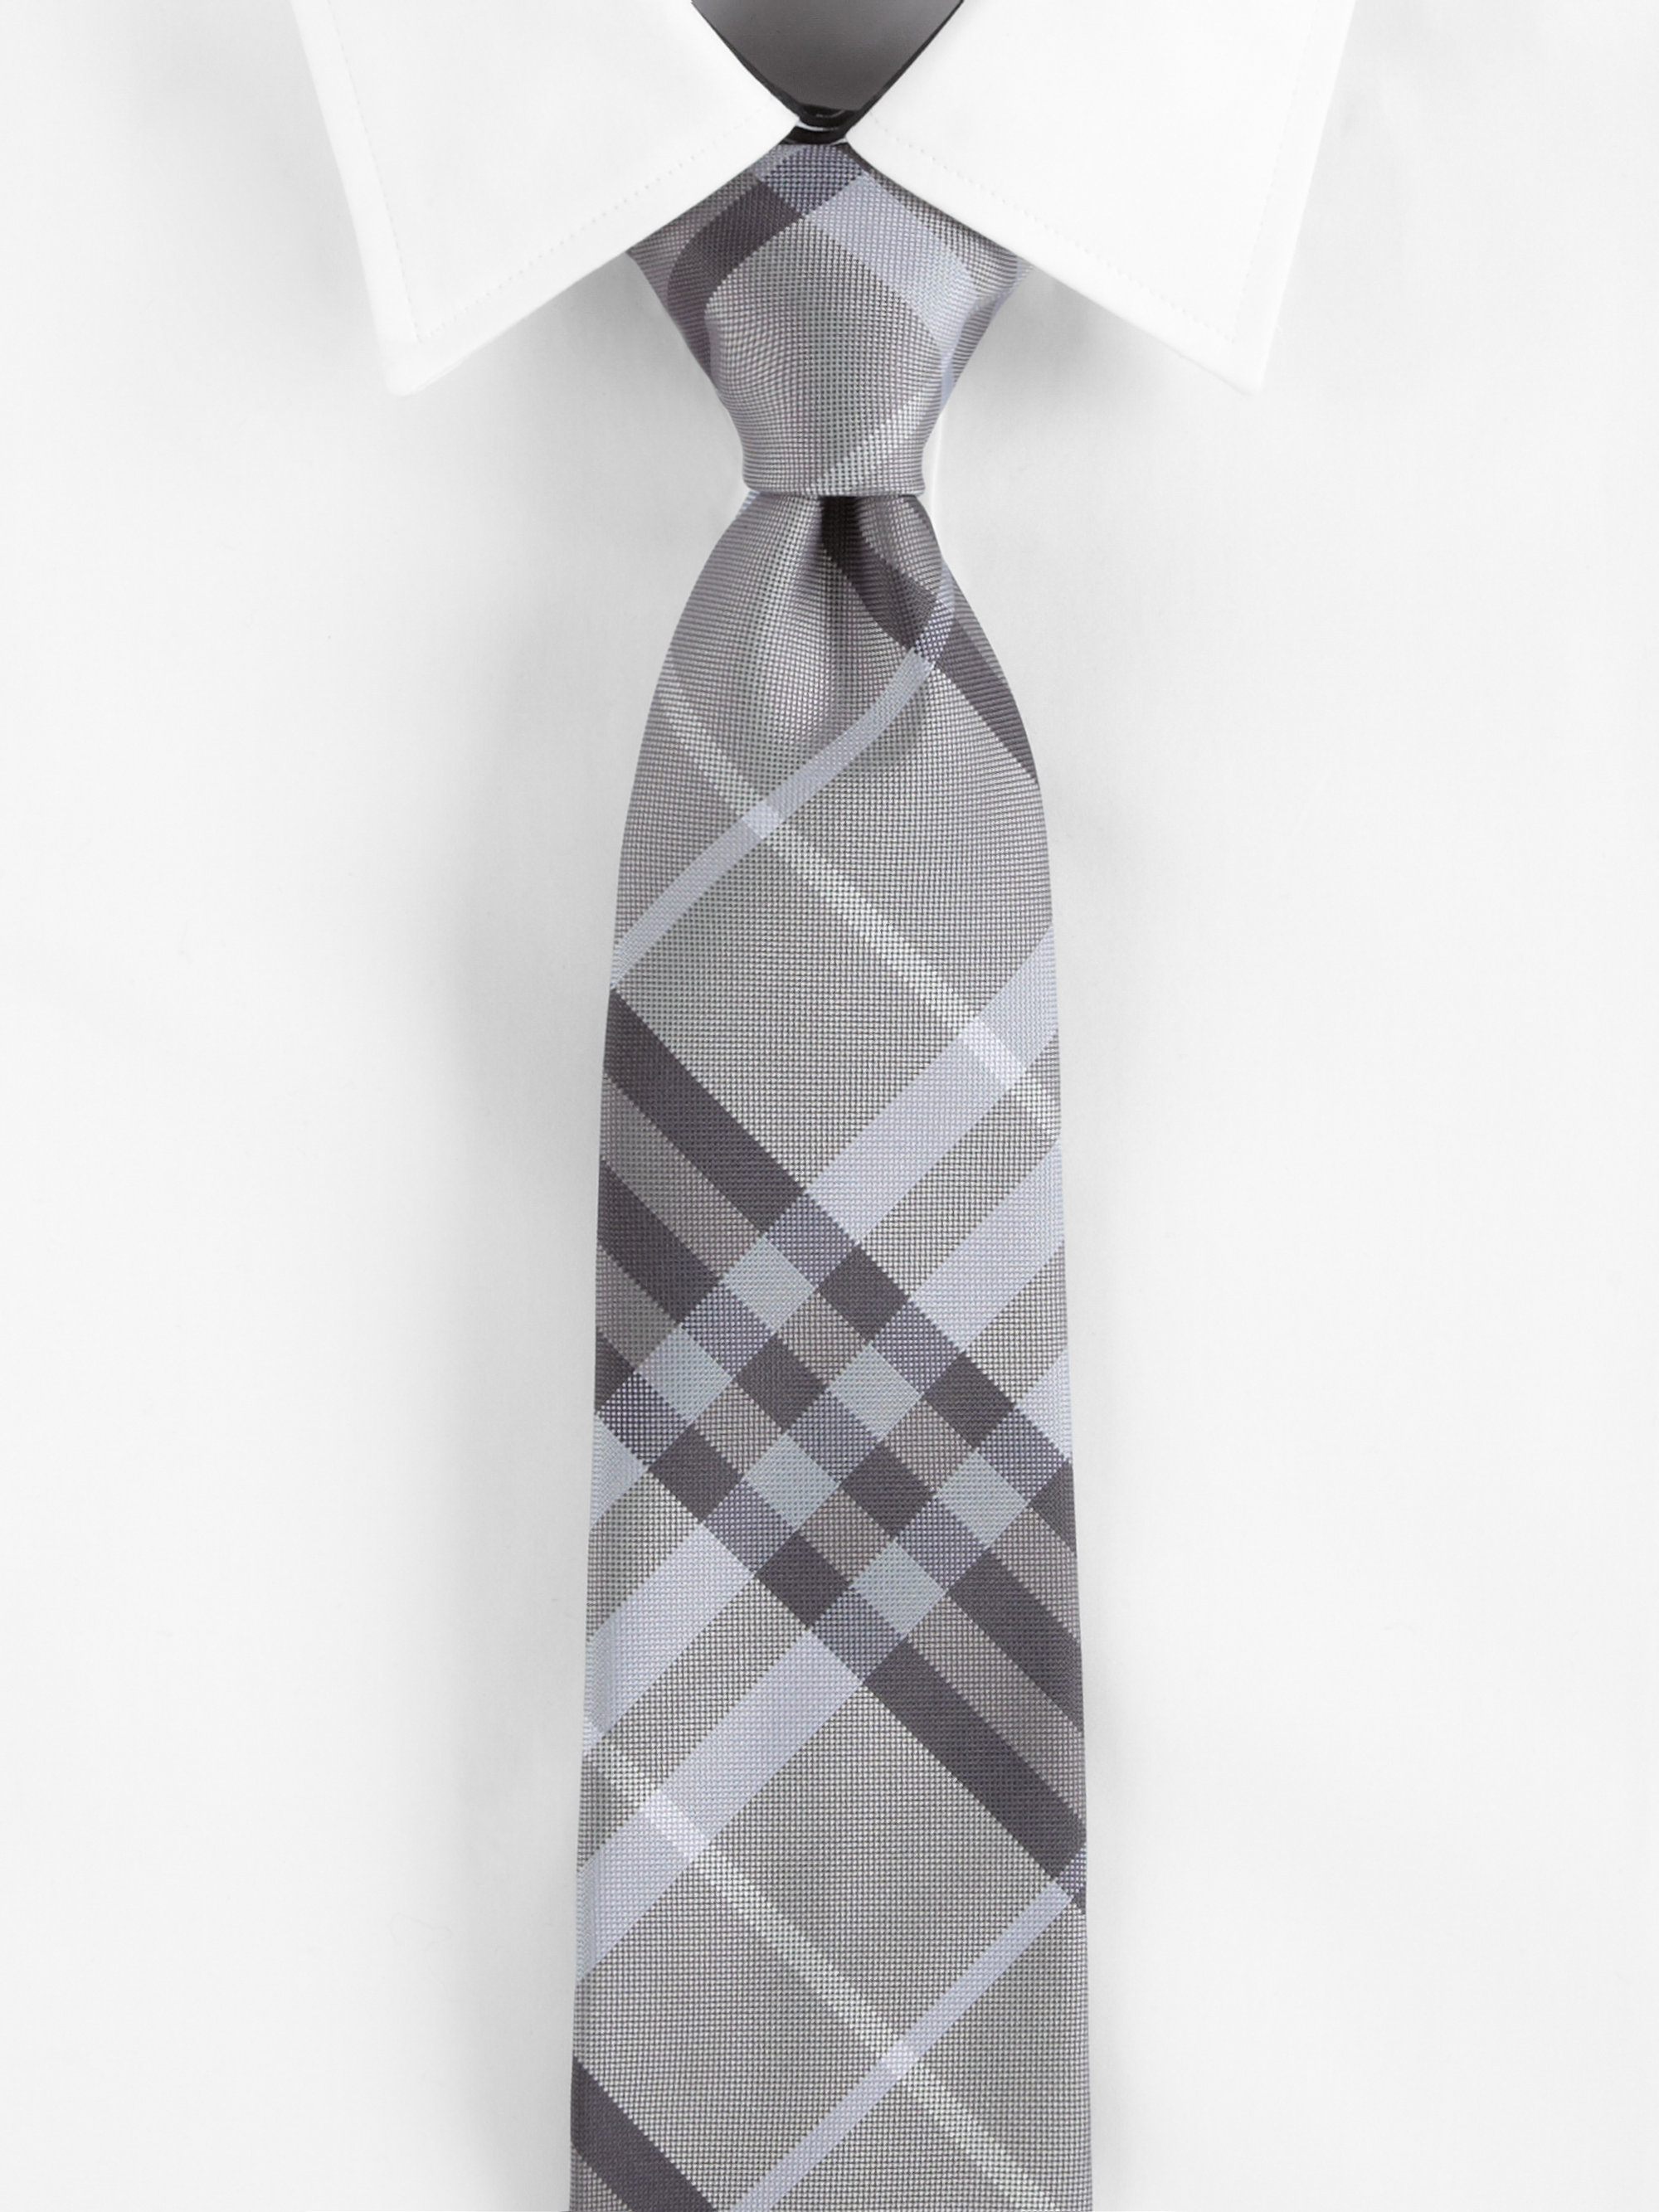 Burberry Outlet Mens Ties | The Art of 